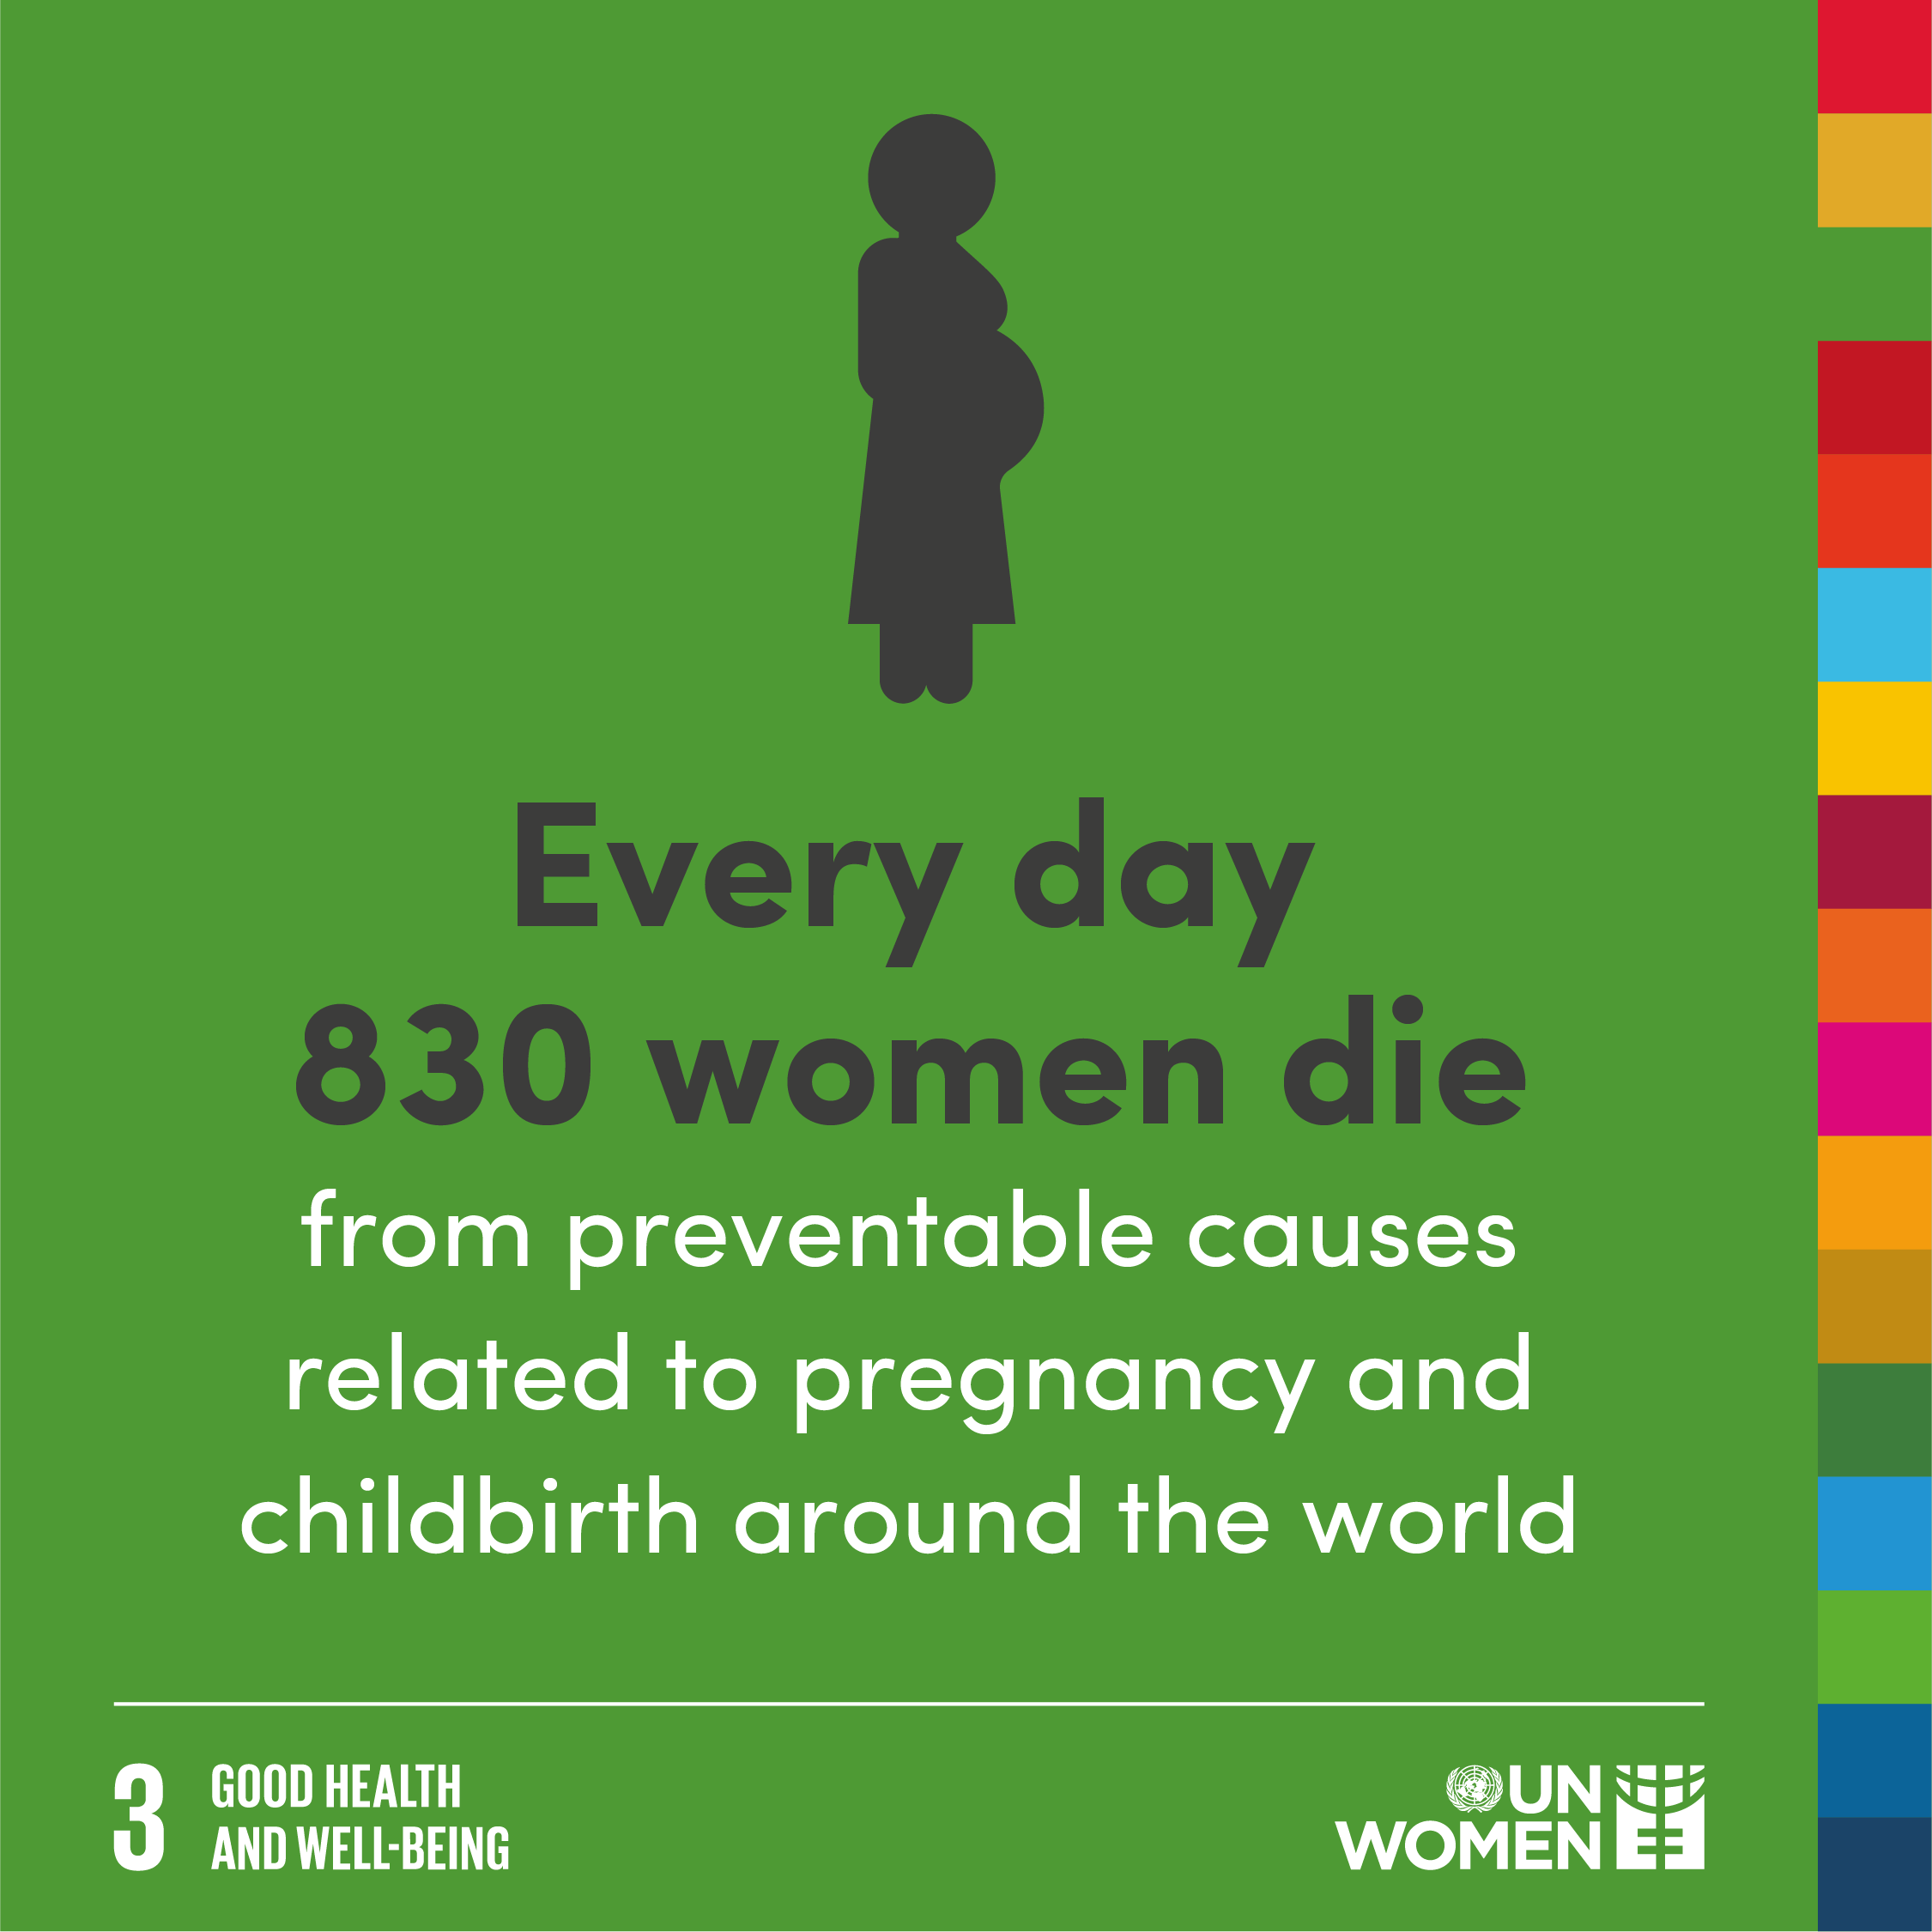 Every day 830 women die from preventable causes related to pregnancy and childbirth around the world. 